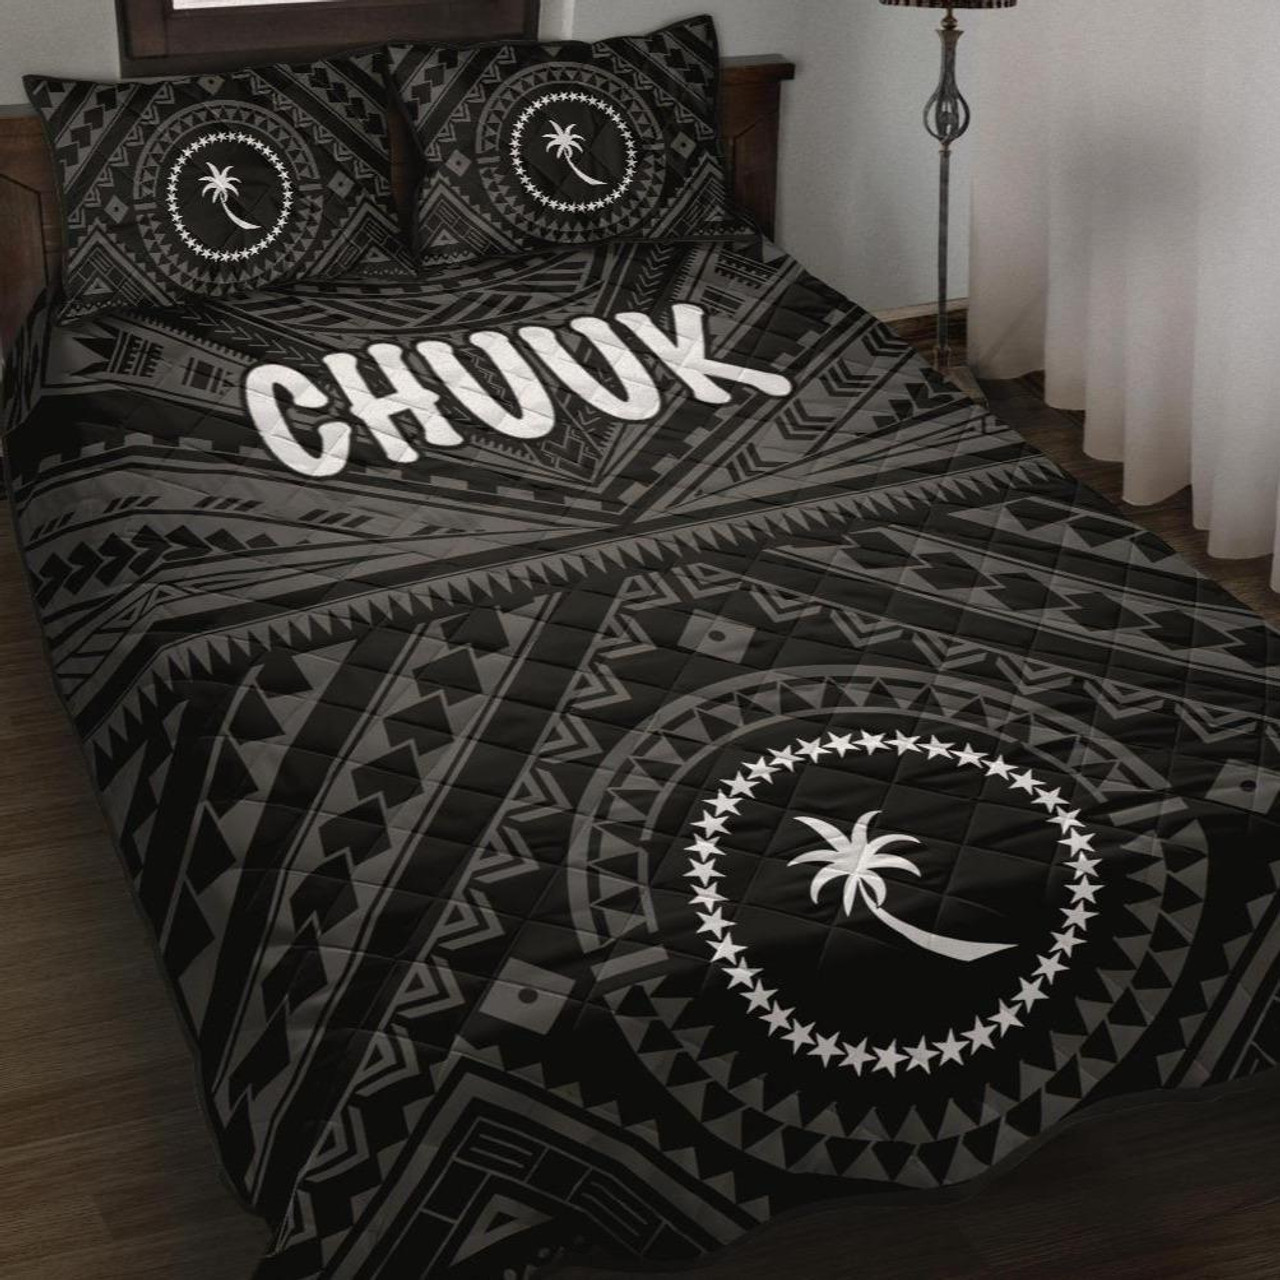 Chuuk Quilt Bed Set - Chuuk Seal With Polynesian Tattoo Style ( Black) 1